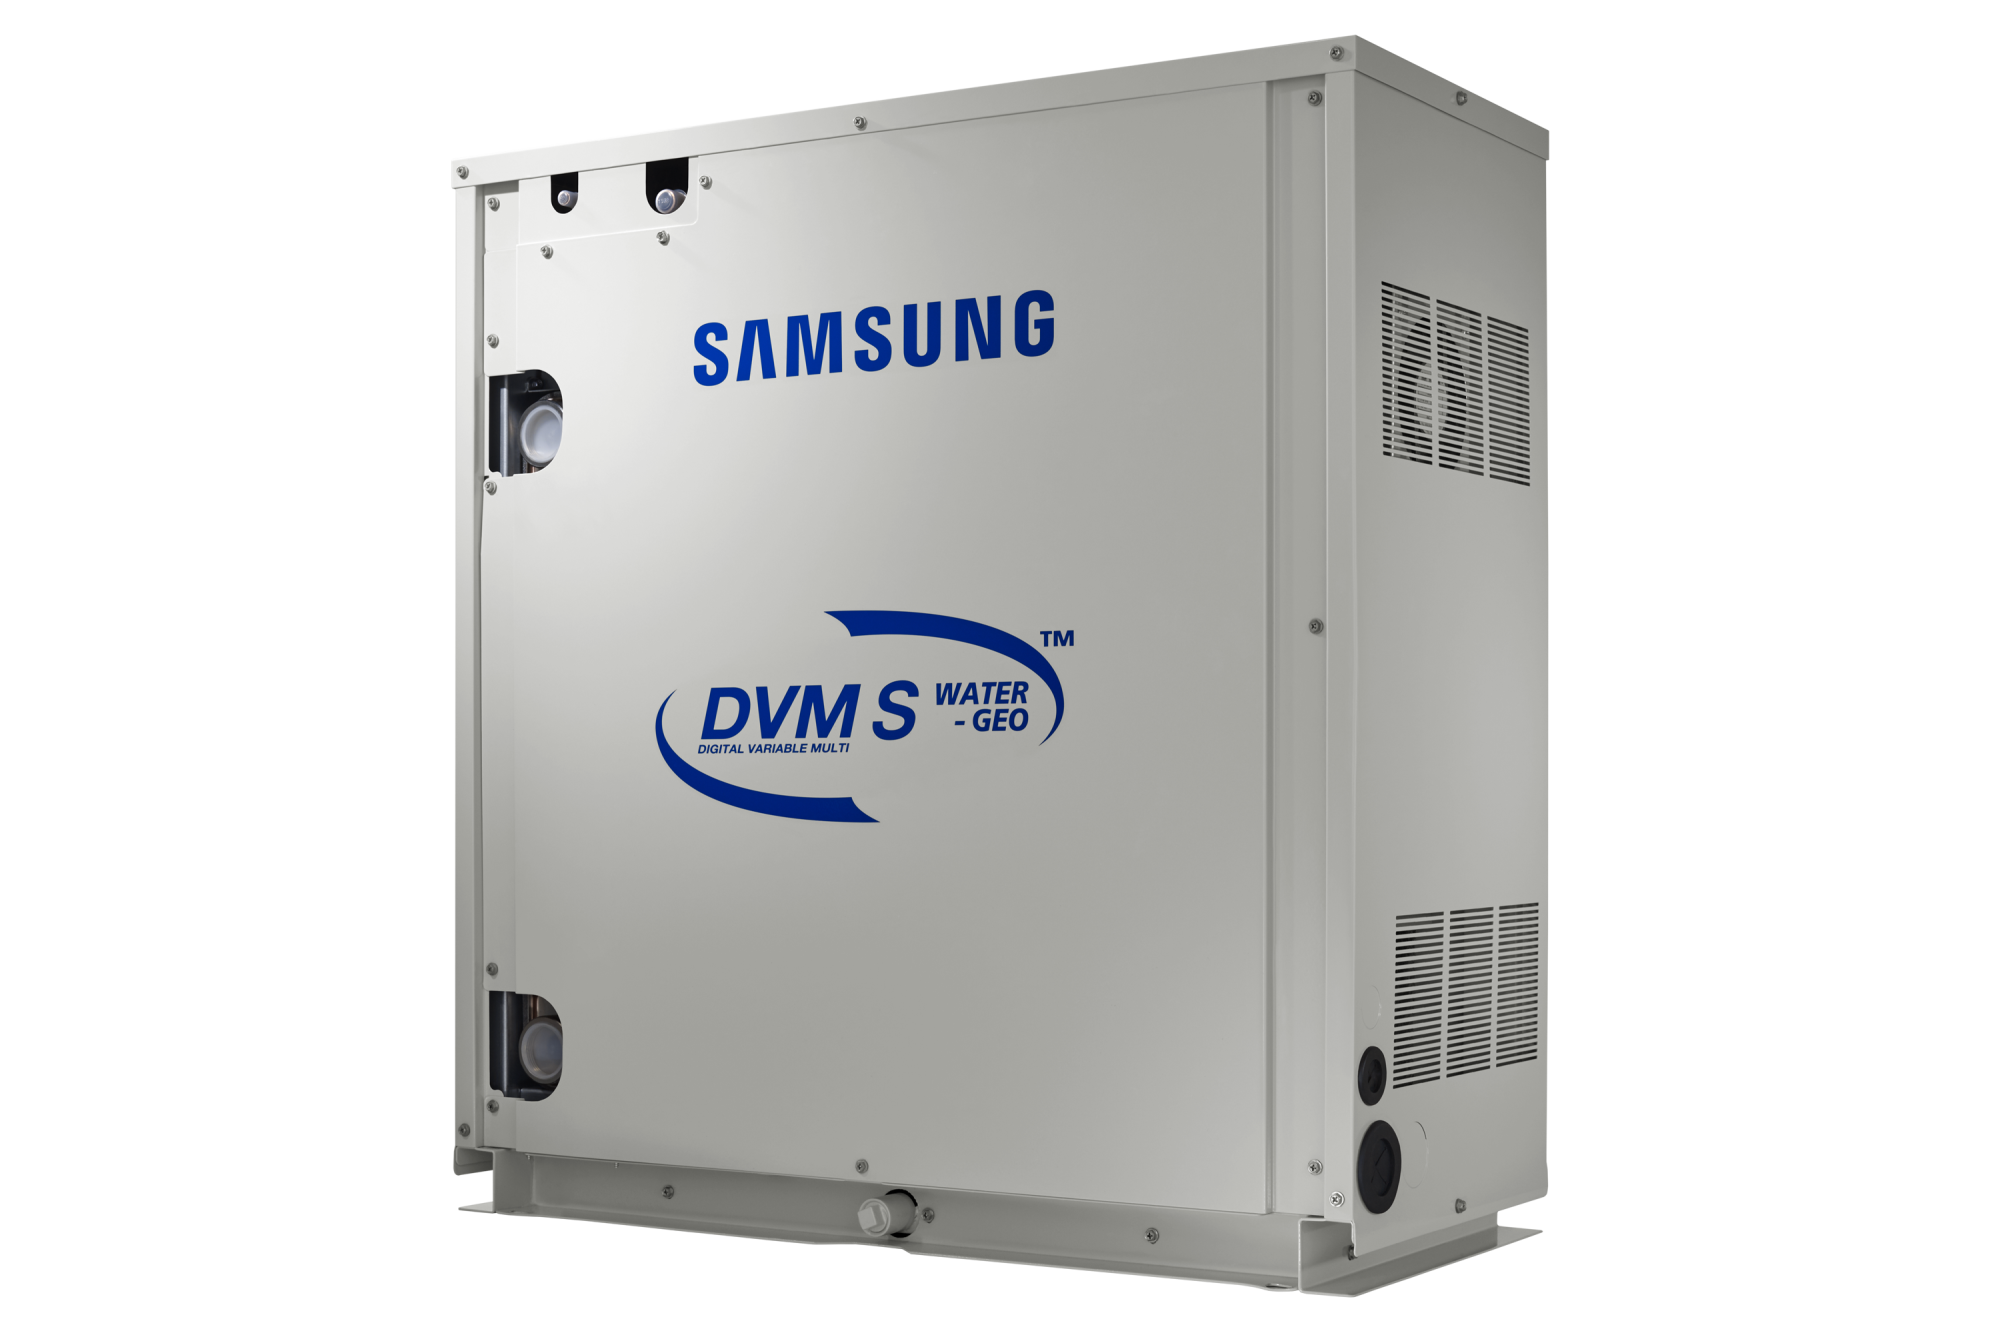 Samsung AM055KXWDCH/AA Air Conditioner DVM S Series, Water Condensing Unit